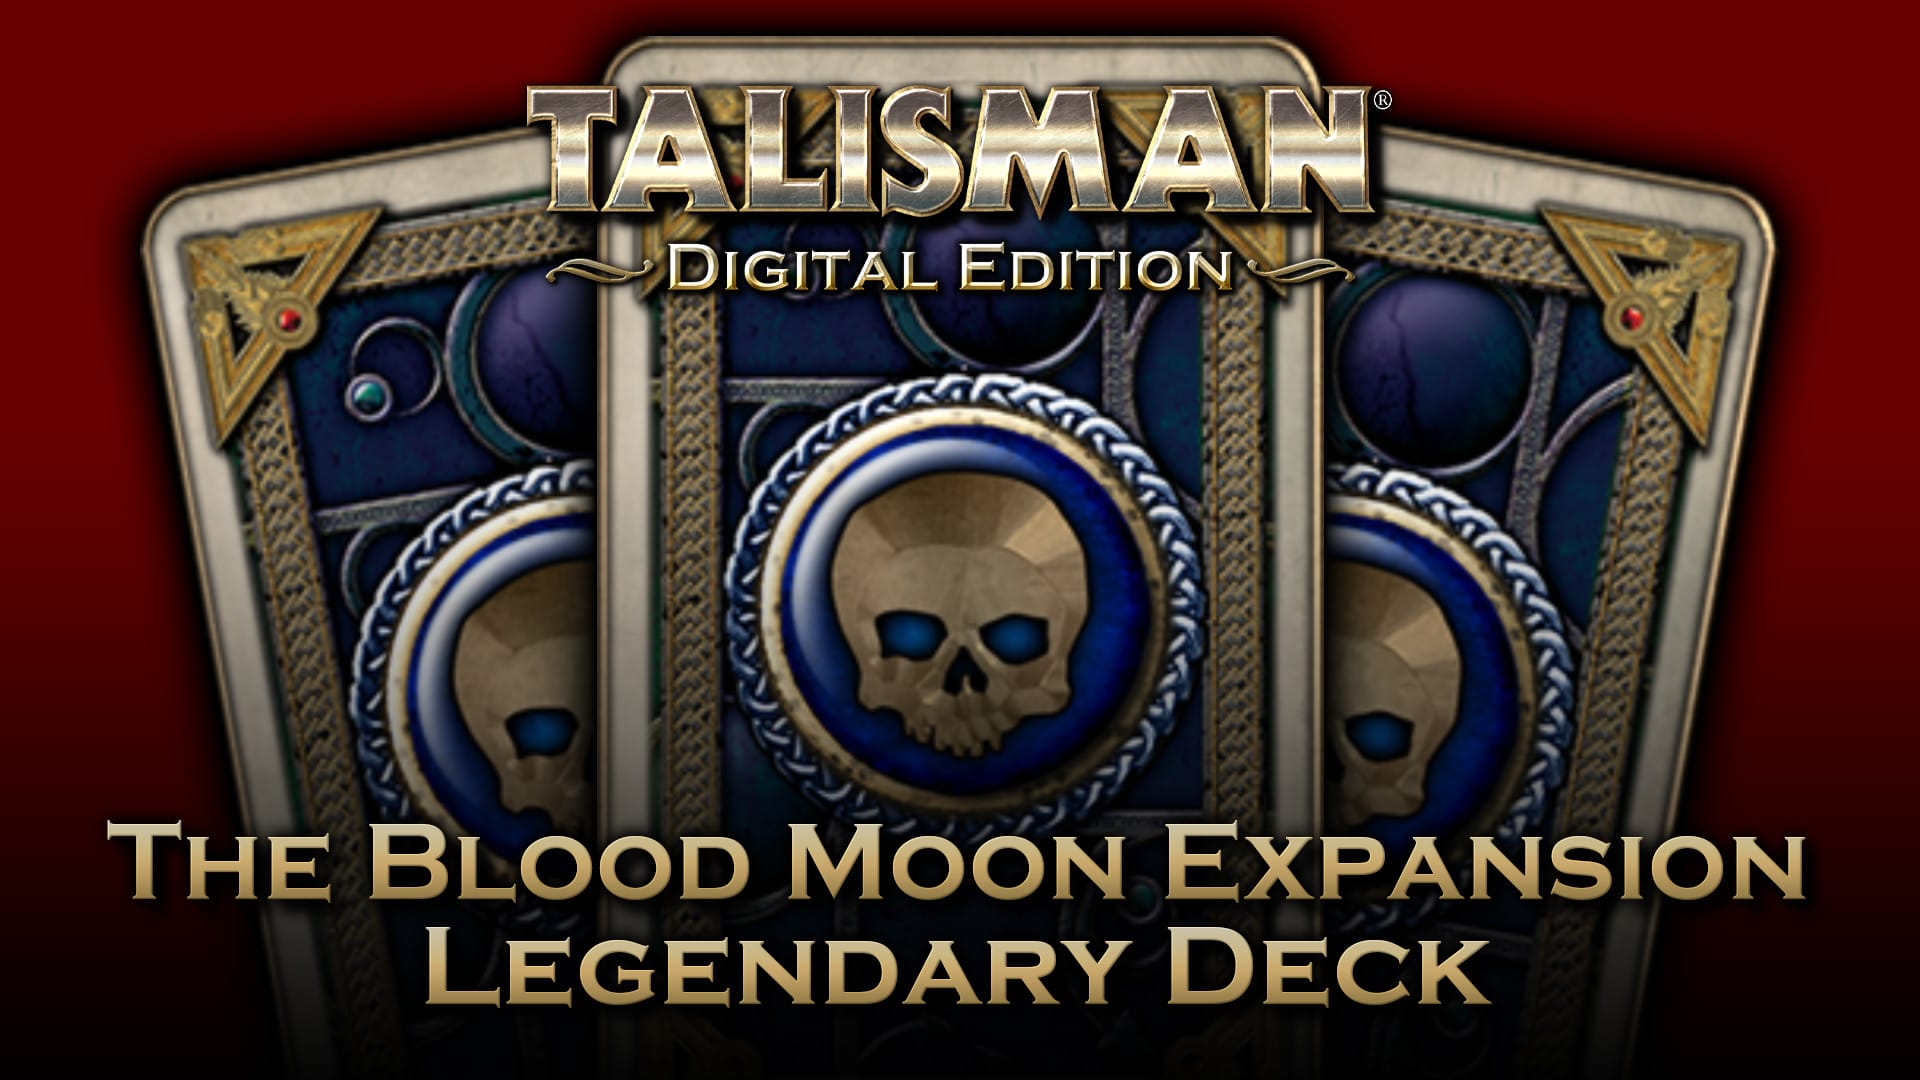 The Blood Moon Expansion: Legendary Deck